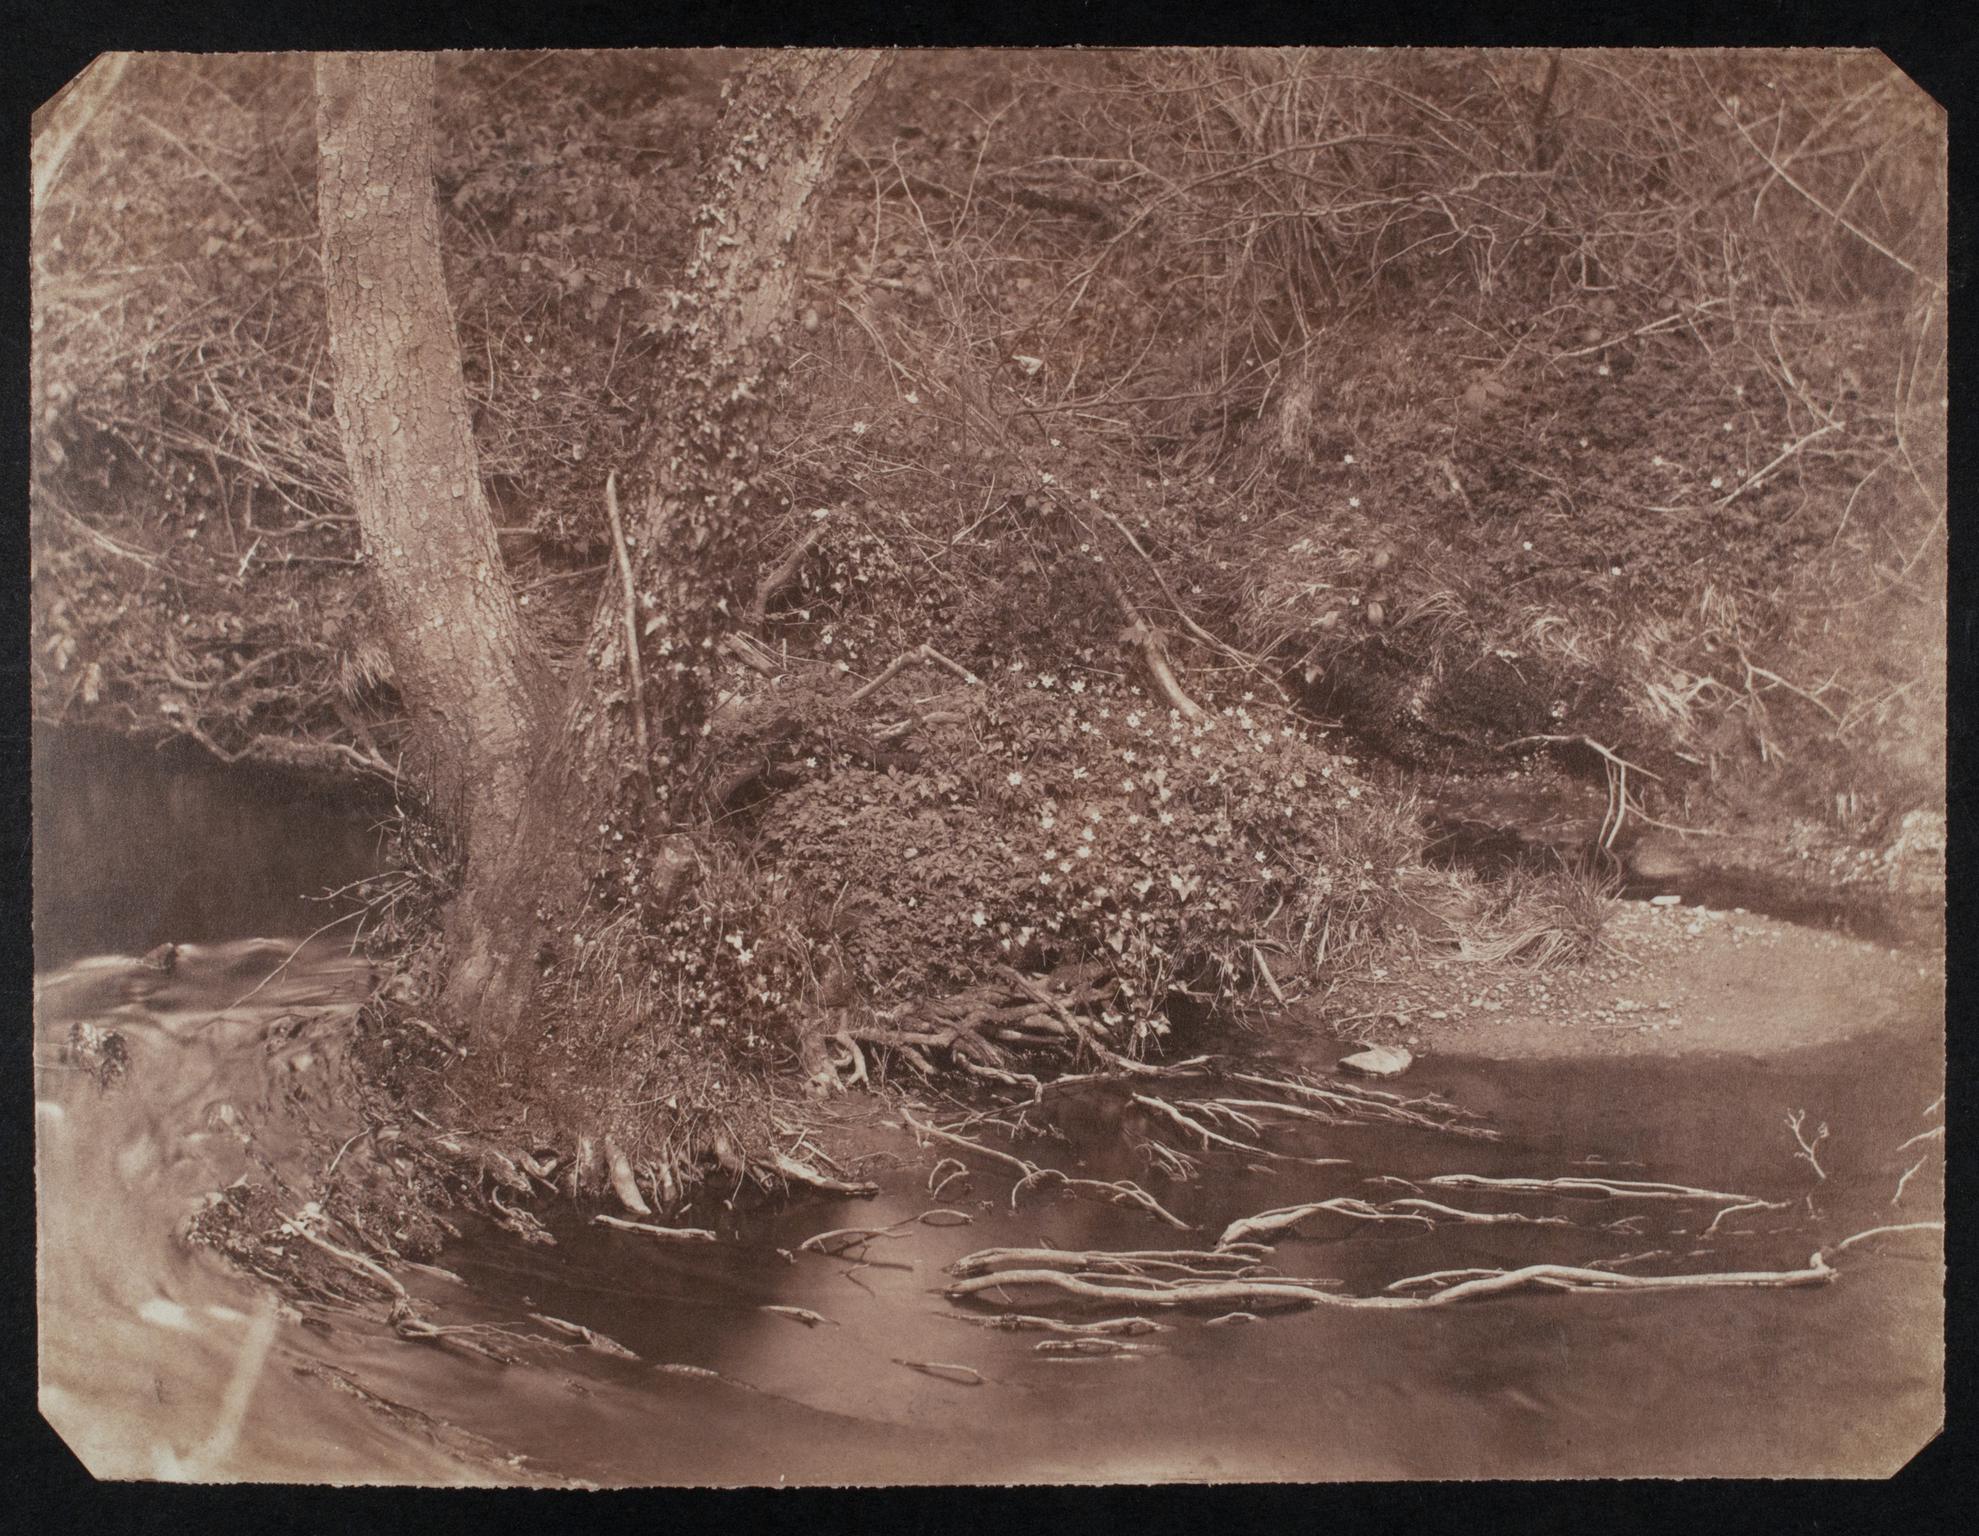 Tree roots in stream, photograph